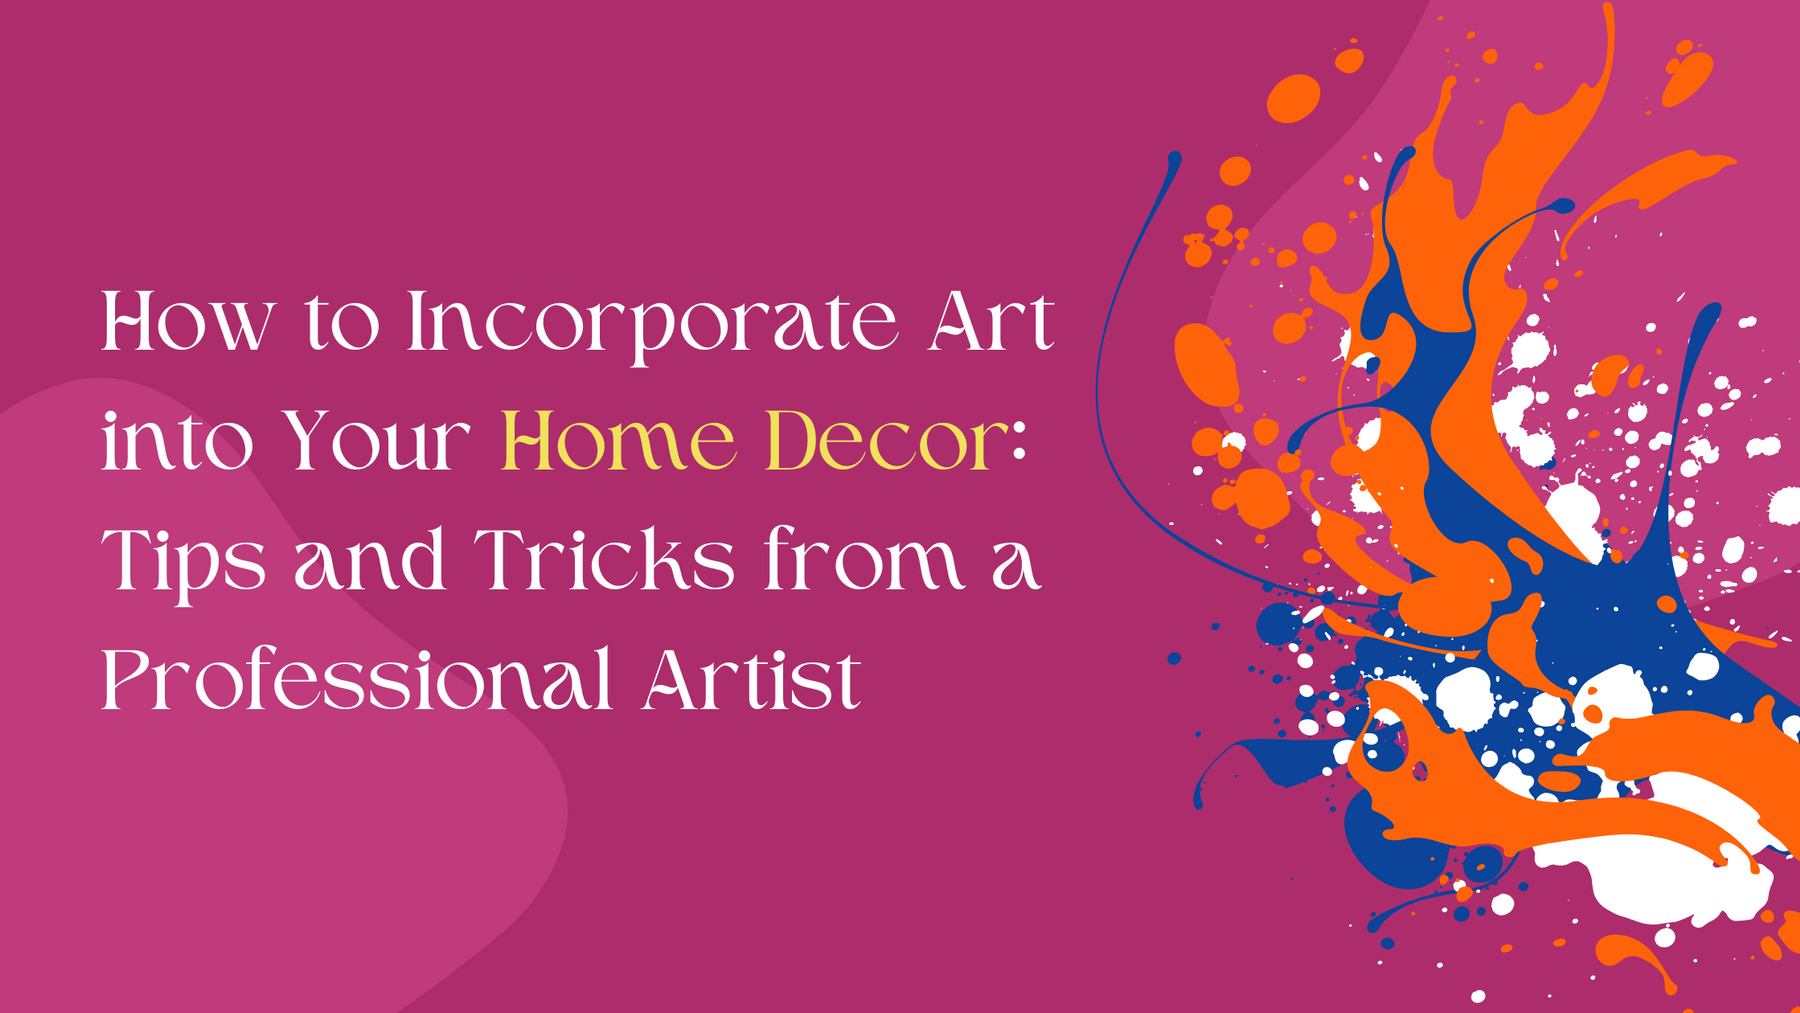 How to Incorporate Art into Your Home Decor: Tips and Tricks from a Professional Artist